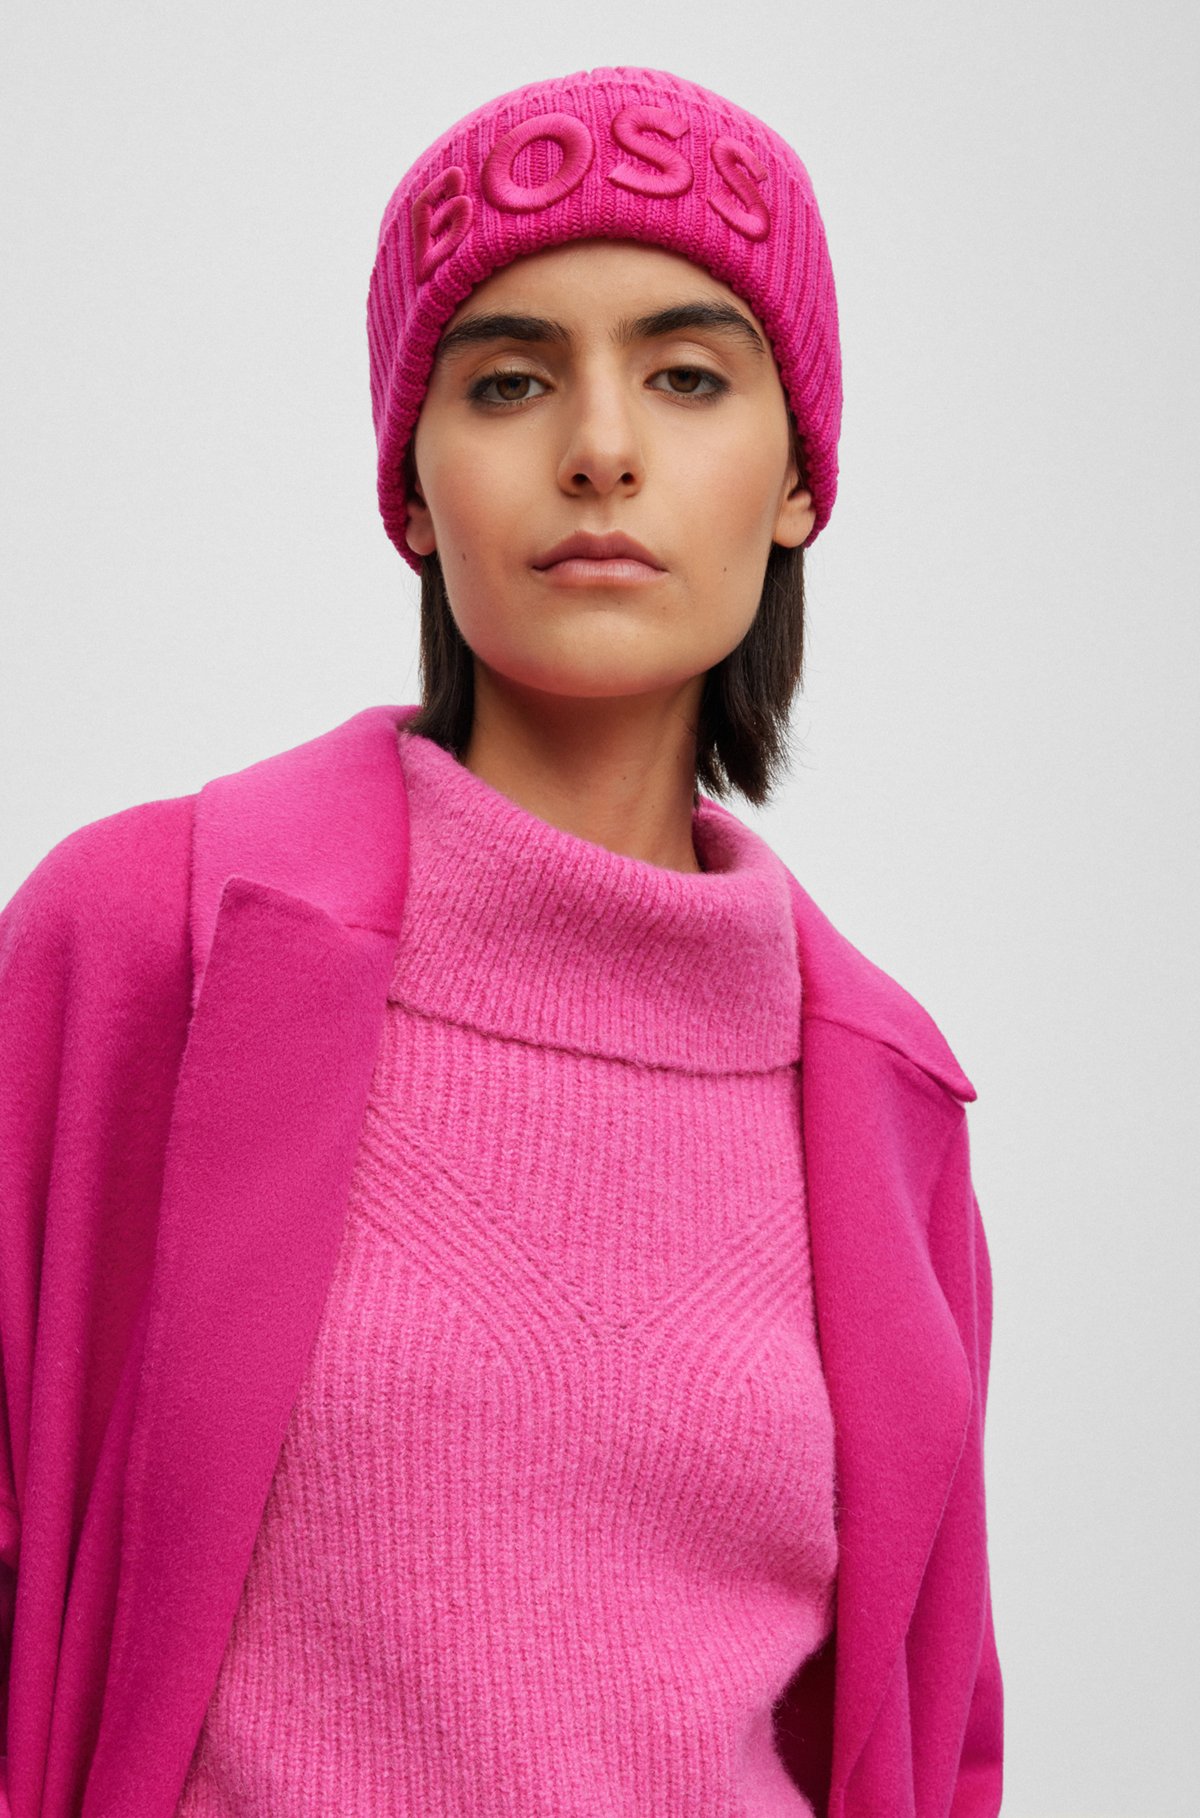 Logo-embroidered rib-knit beanie hat in virgin wool, Pink